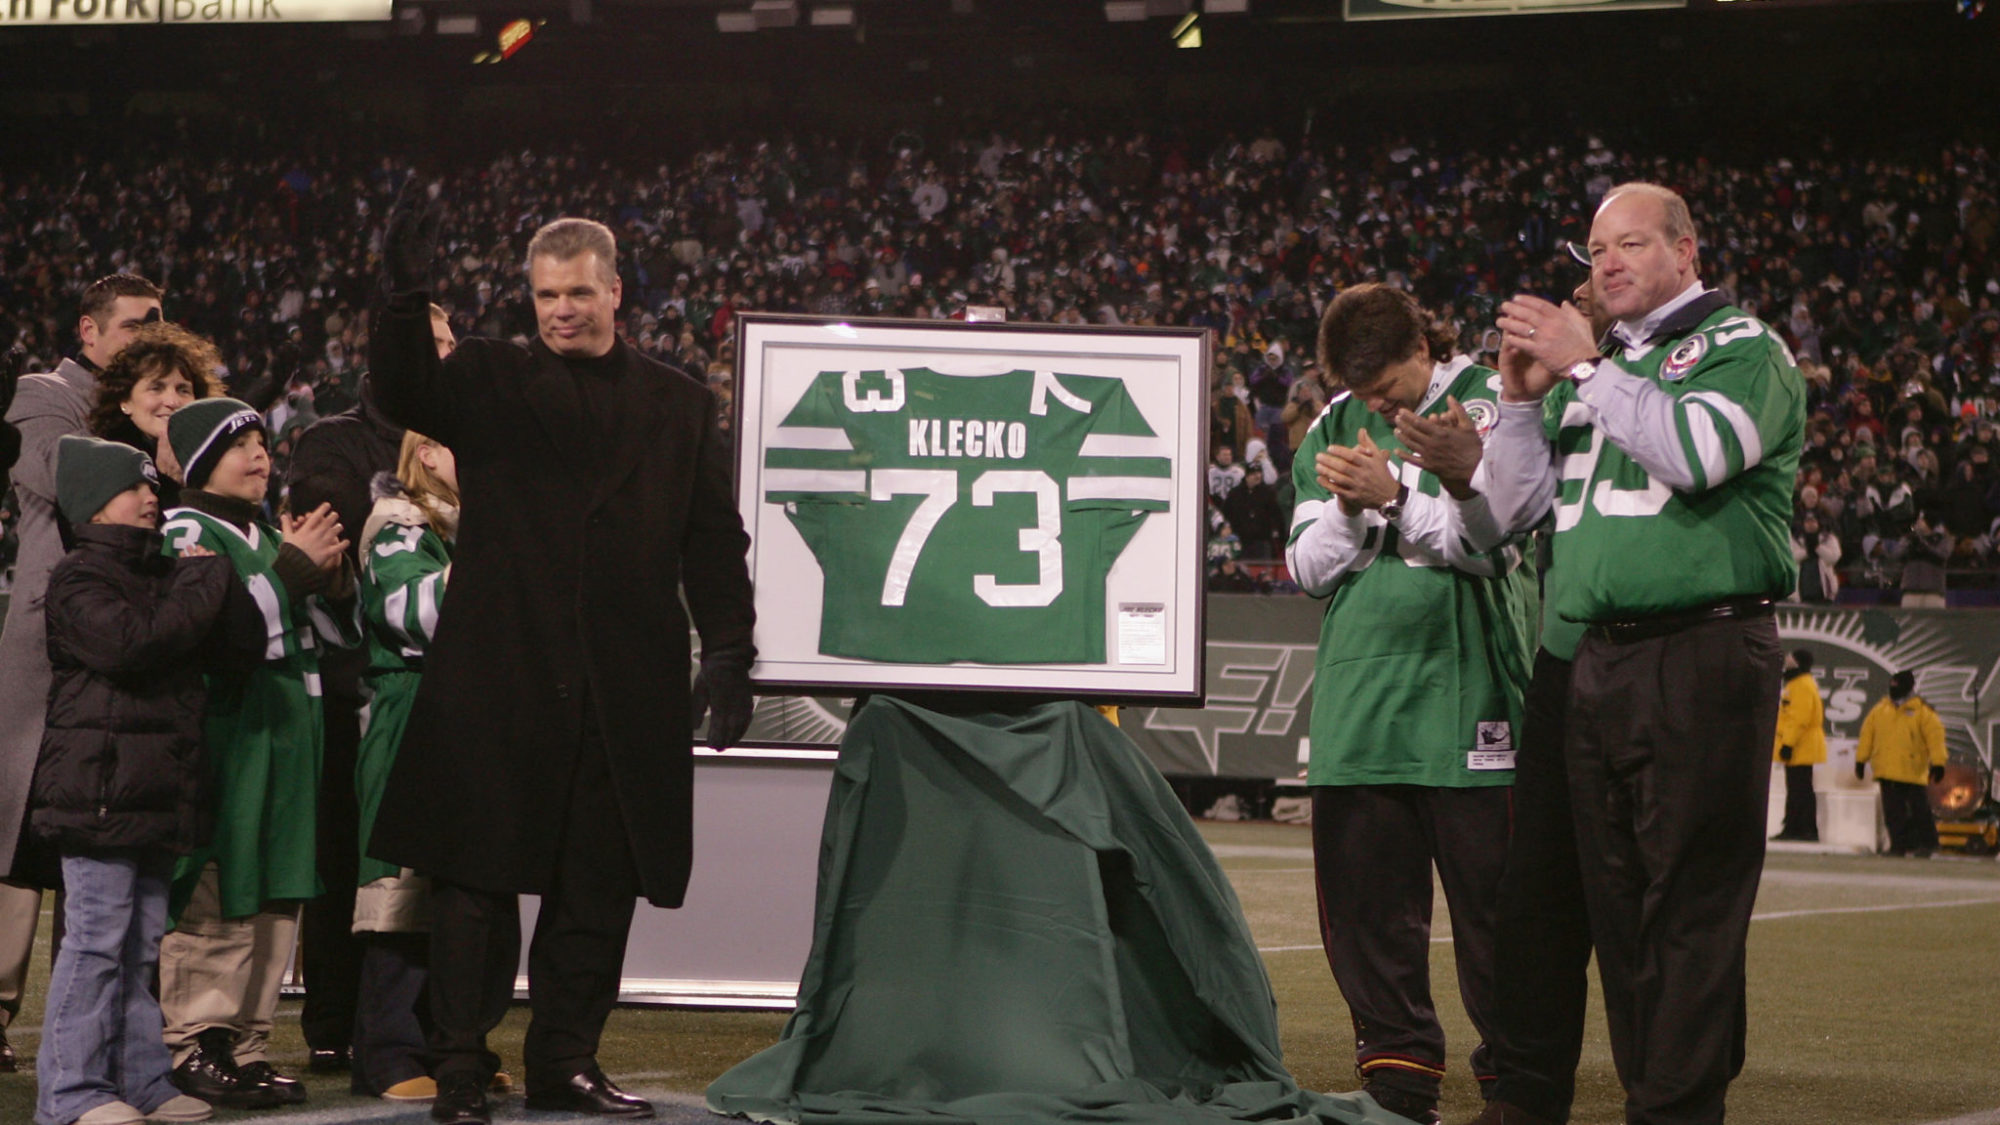 EAST RUTHERFORD, NJ - DECEMBER 26: Former player Joe Klecko (L) of the New York Jets gets his jersey retired during halftime against the New England Patriots on December 26, 2004 at Giants Stadium in East Rutherford, New Jersey. The Patriots defeated the Jets 23-7.